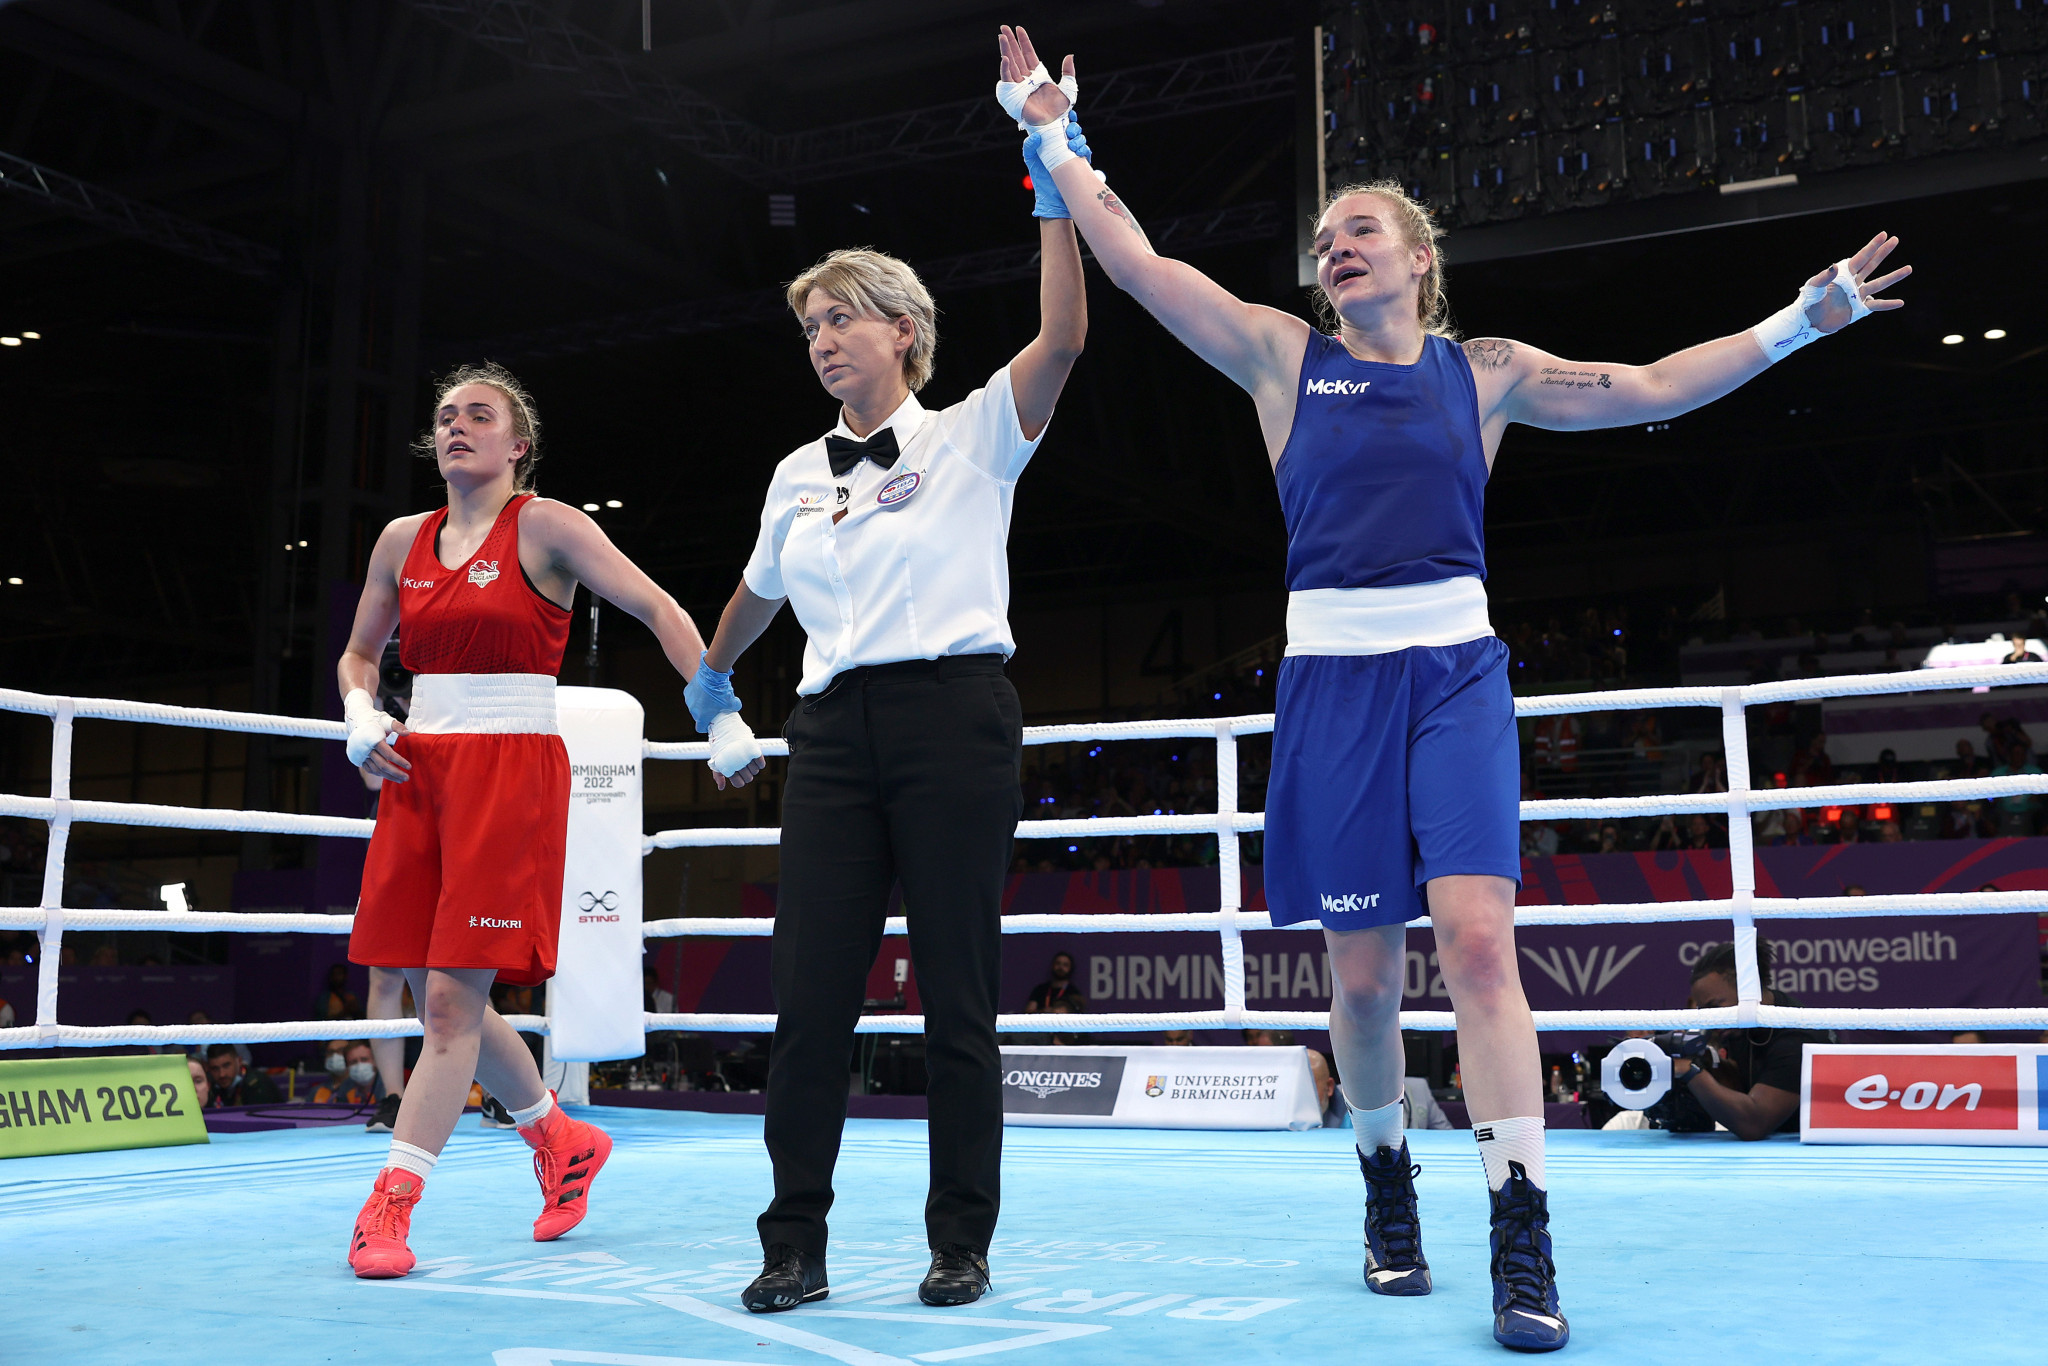 Ireland's Amy Broadhurst is two fights away from a third major gold medal in 2022 ©Getty Images